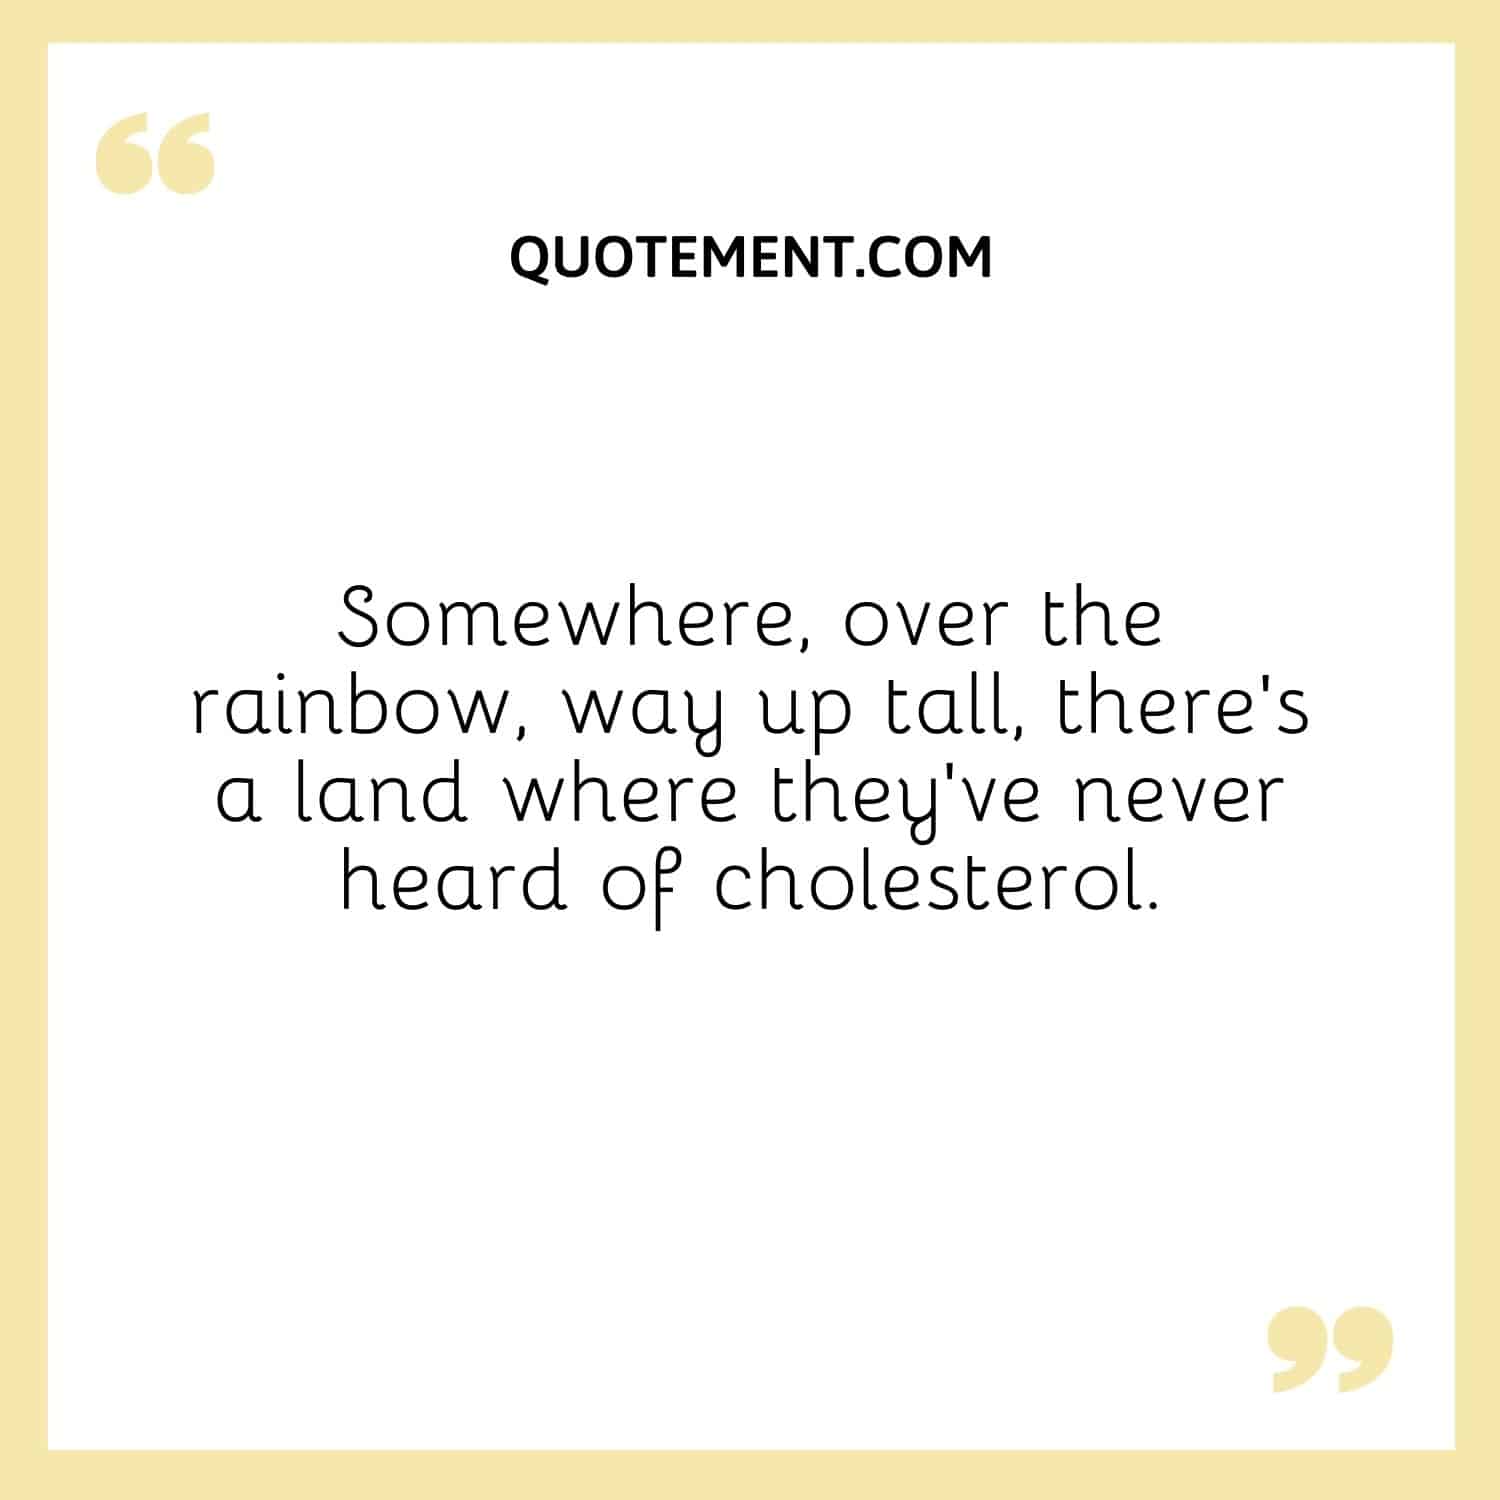 Somewhere, over the rainbow, way up tall, there’s a land where they’ve never heard of cholesterol